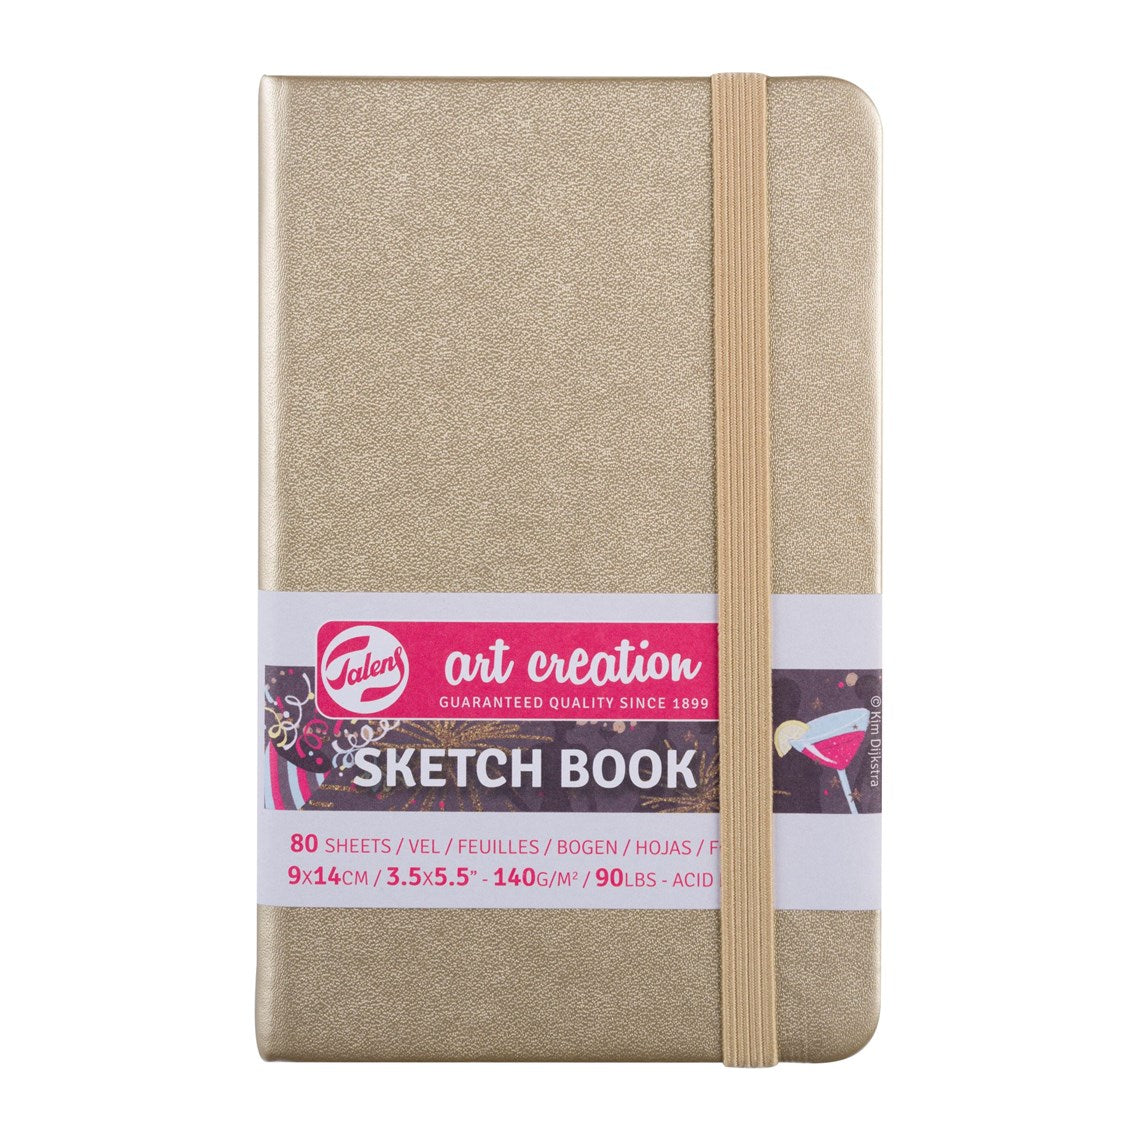 Talens Art Creation, 3.5 x 5.1 Sketchbook, Silver or Gold – ARCH